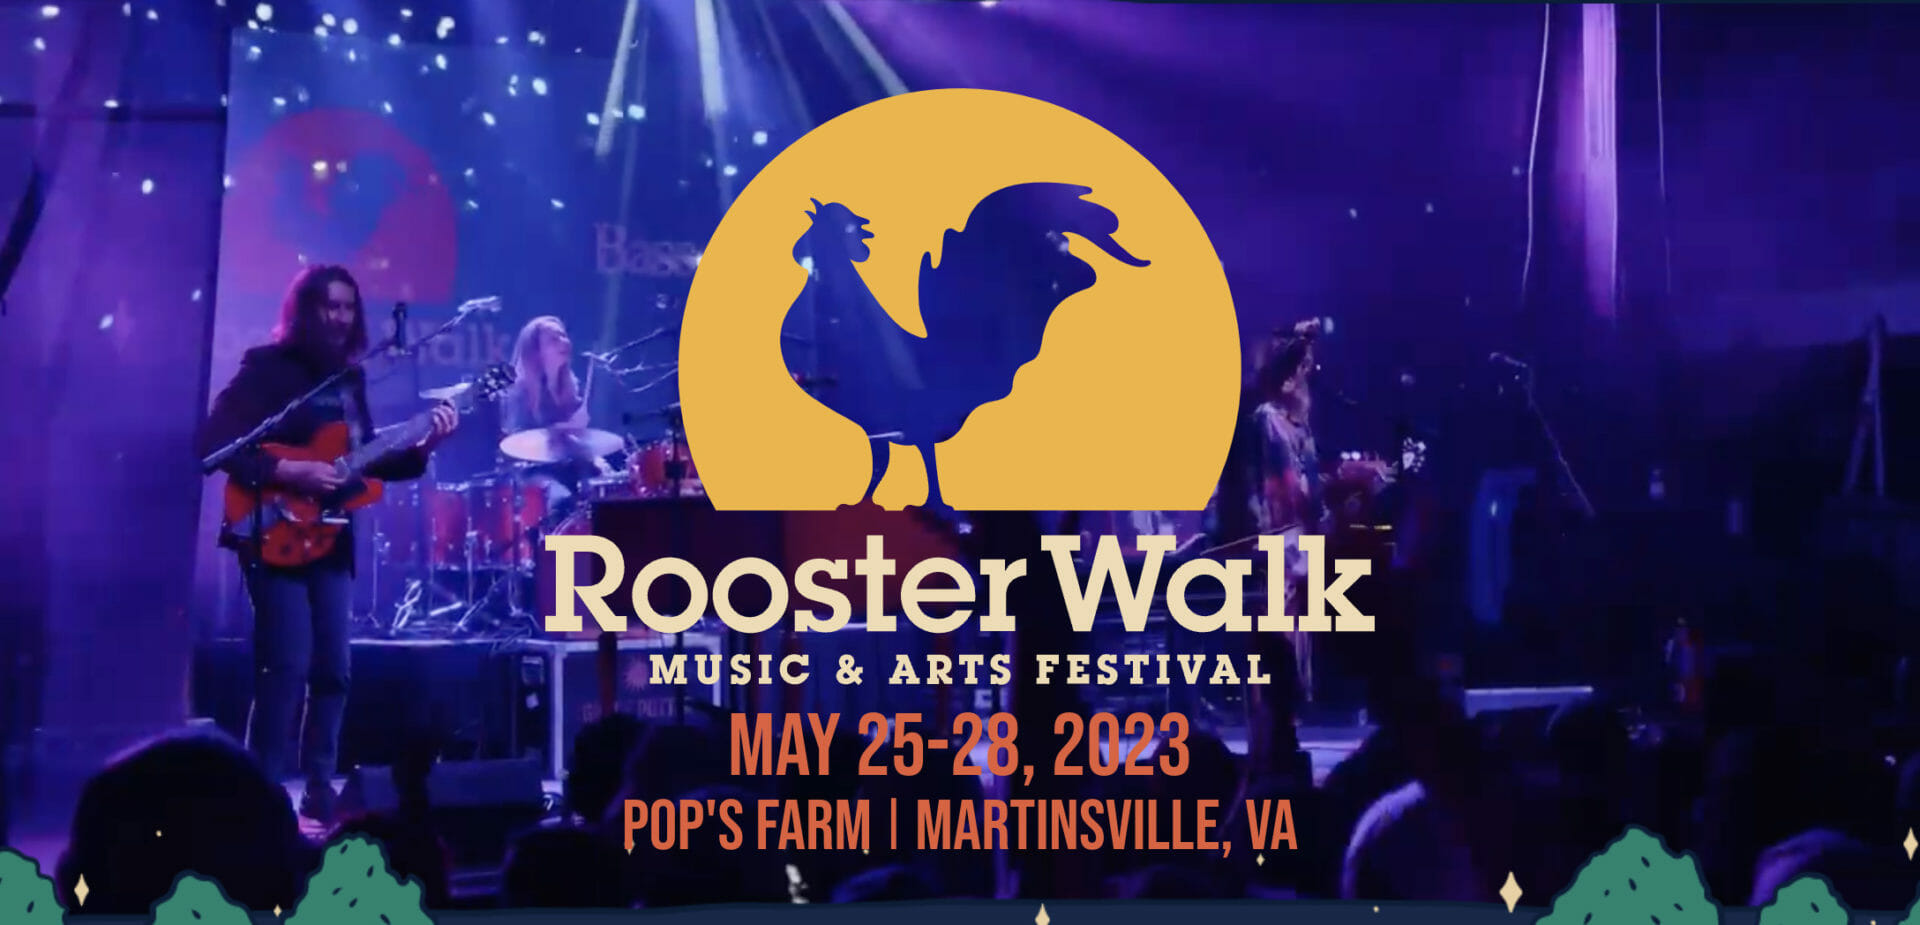 Rooster Walk Music & Arts Festival Details 2023 Lineup: Greensky Bluegrass, The Marshall Tucker Band, Trouble No More, Doom Flamingo and More